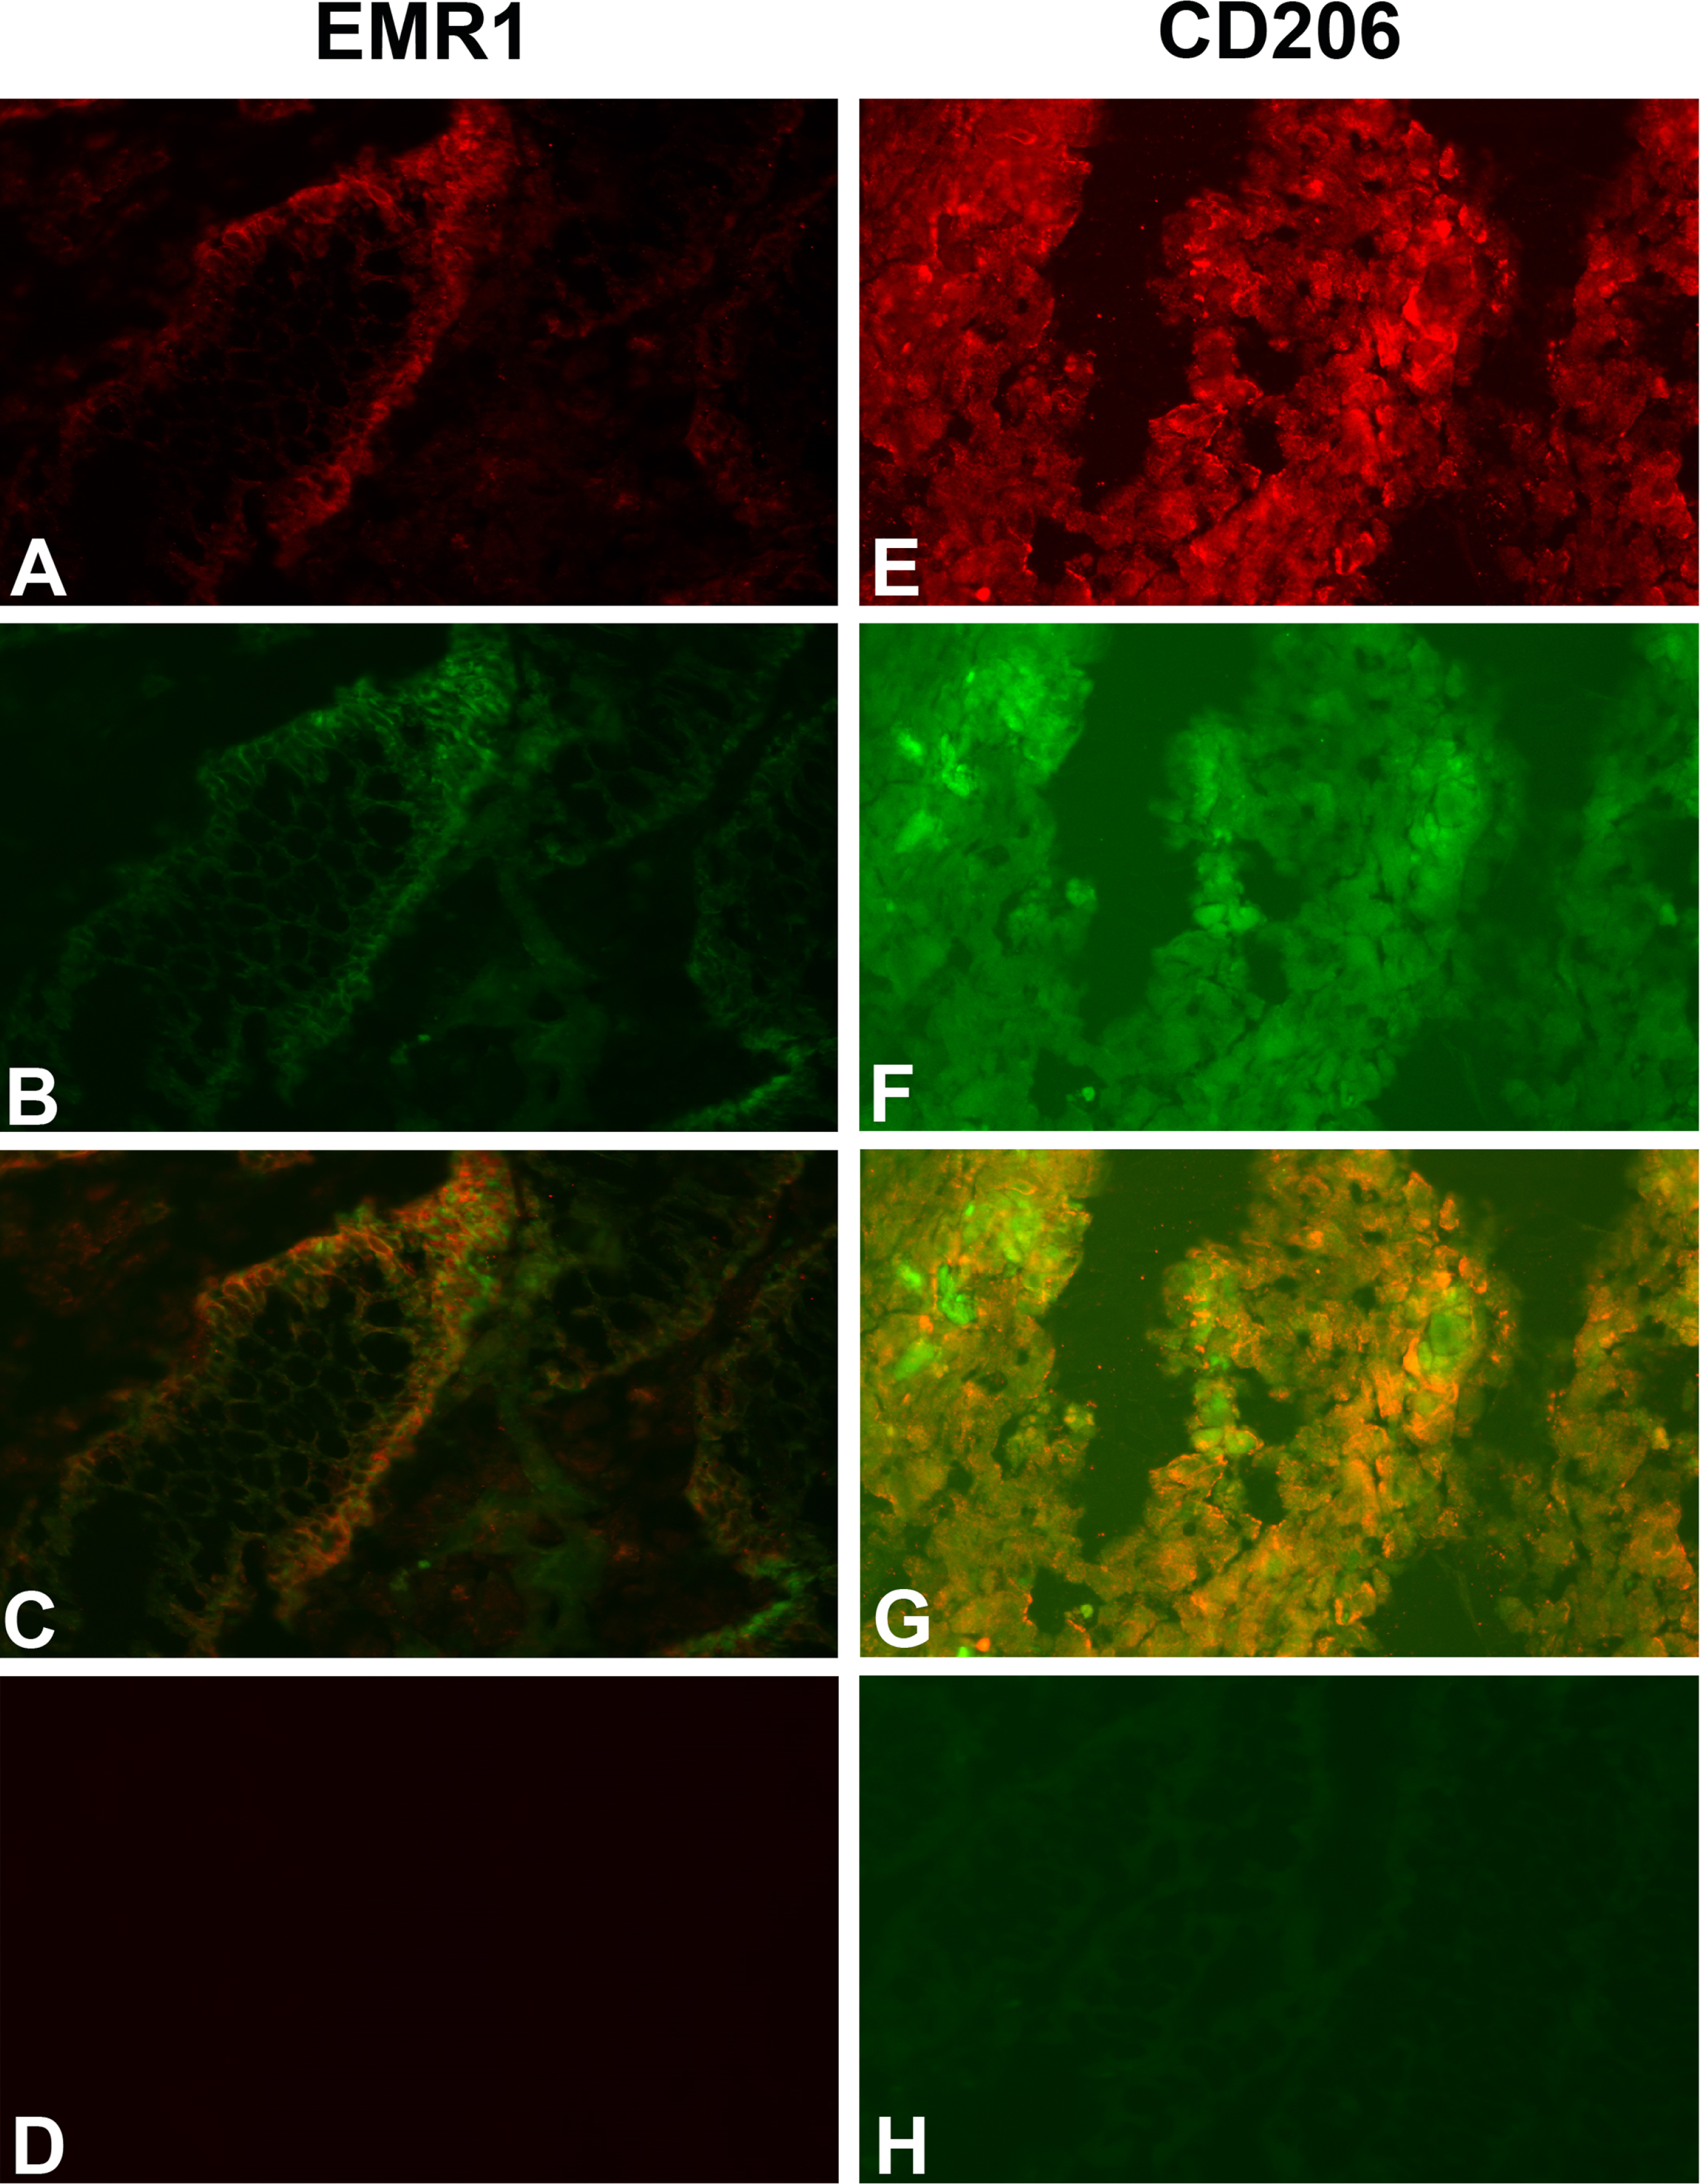 Two-color immunofluorescence staining of primary CC tissue with anti-EMR1 and anti-EpCAM, and anti-CD206 and anti-EpCAM. (A) Anti-EMR1, (E) Anti-CD206, both red color. (B, F) anti-EpCAM, green color. (C, G) Overlays giving yellow color of double-stained cells. (D) Rabbit IgG; negative control for anti-EMR1 (H). FITC-conjugated mouse IgG; negative control for anti-EpCAM. Original magnification:×200.